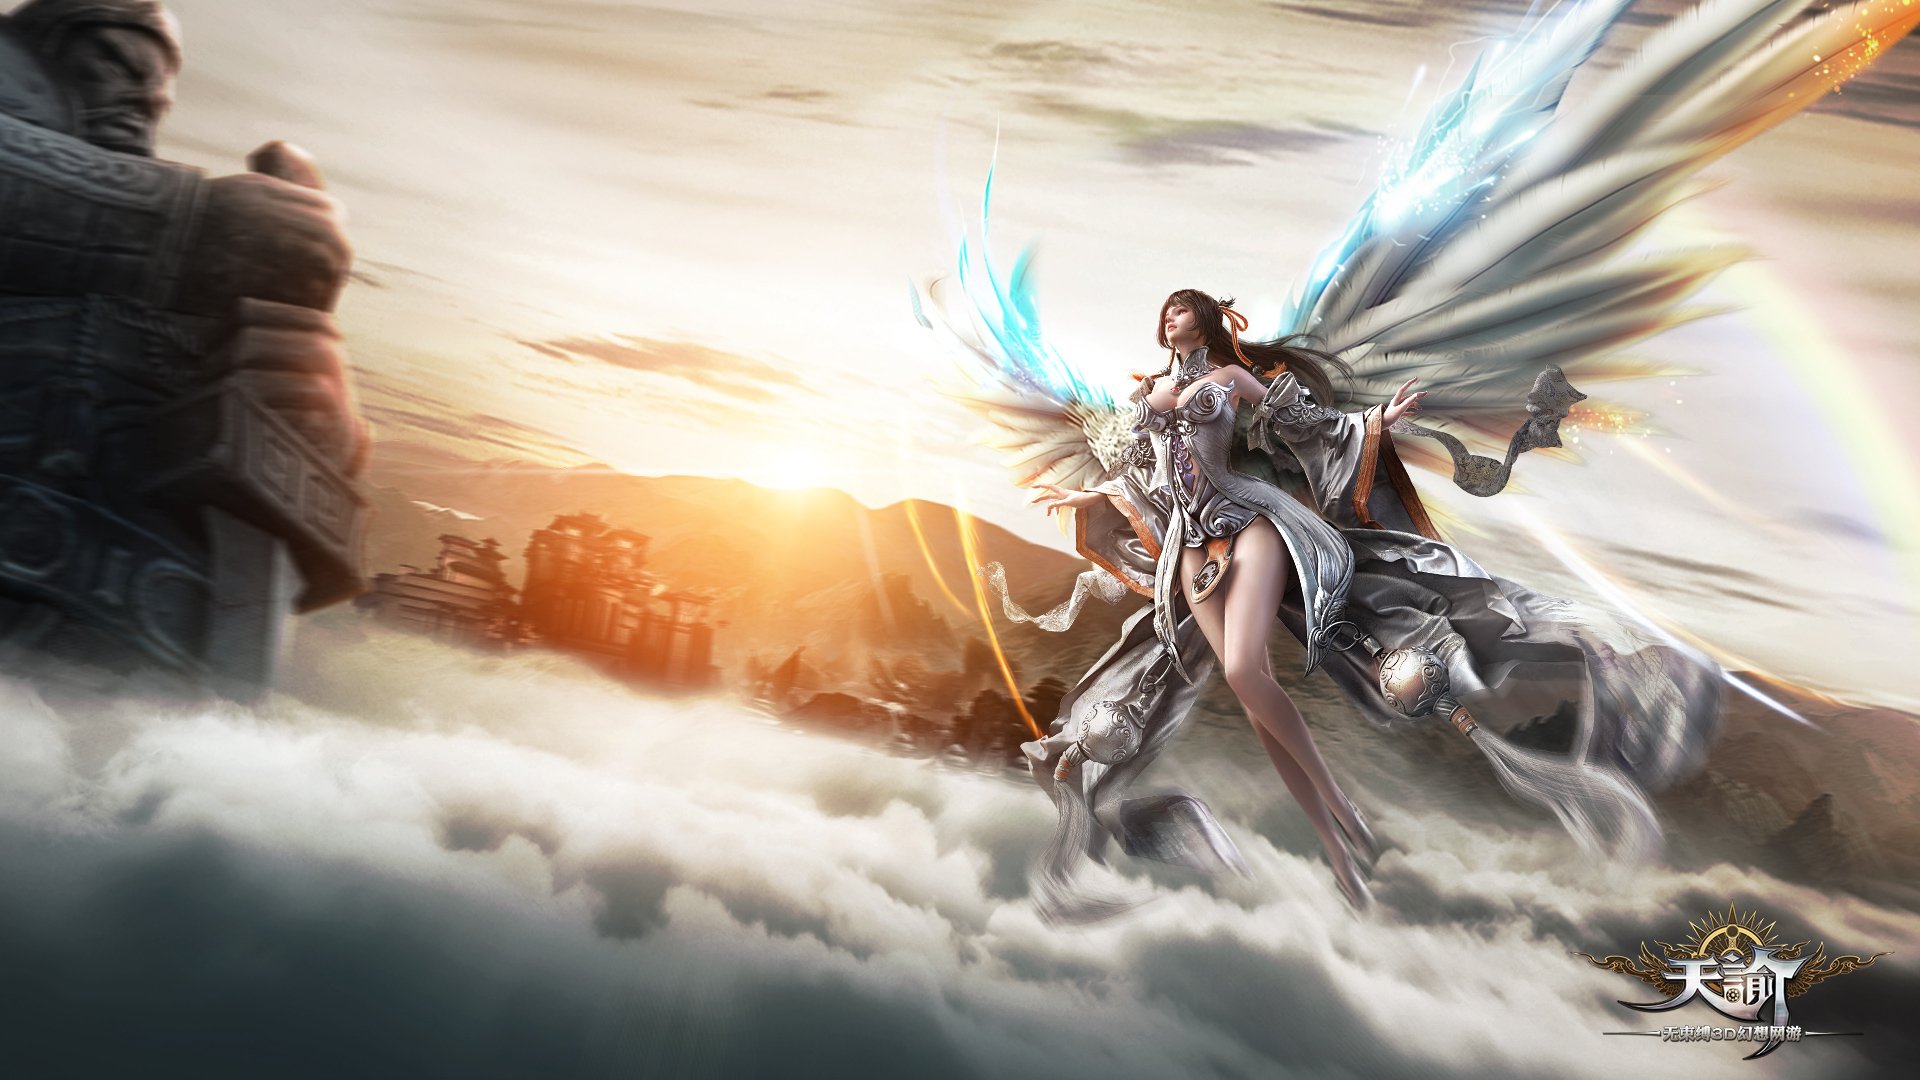 Revelation Online Full Hd Wallpaper And Background Image  1920X1080  Id711244-3813